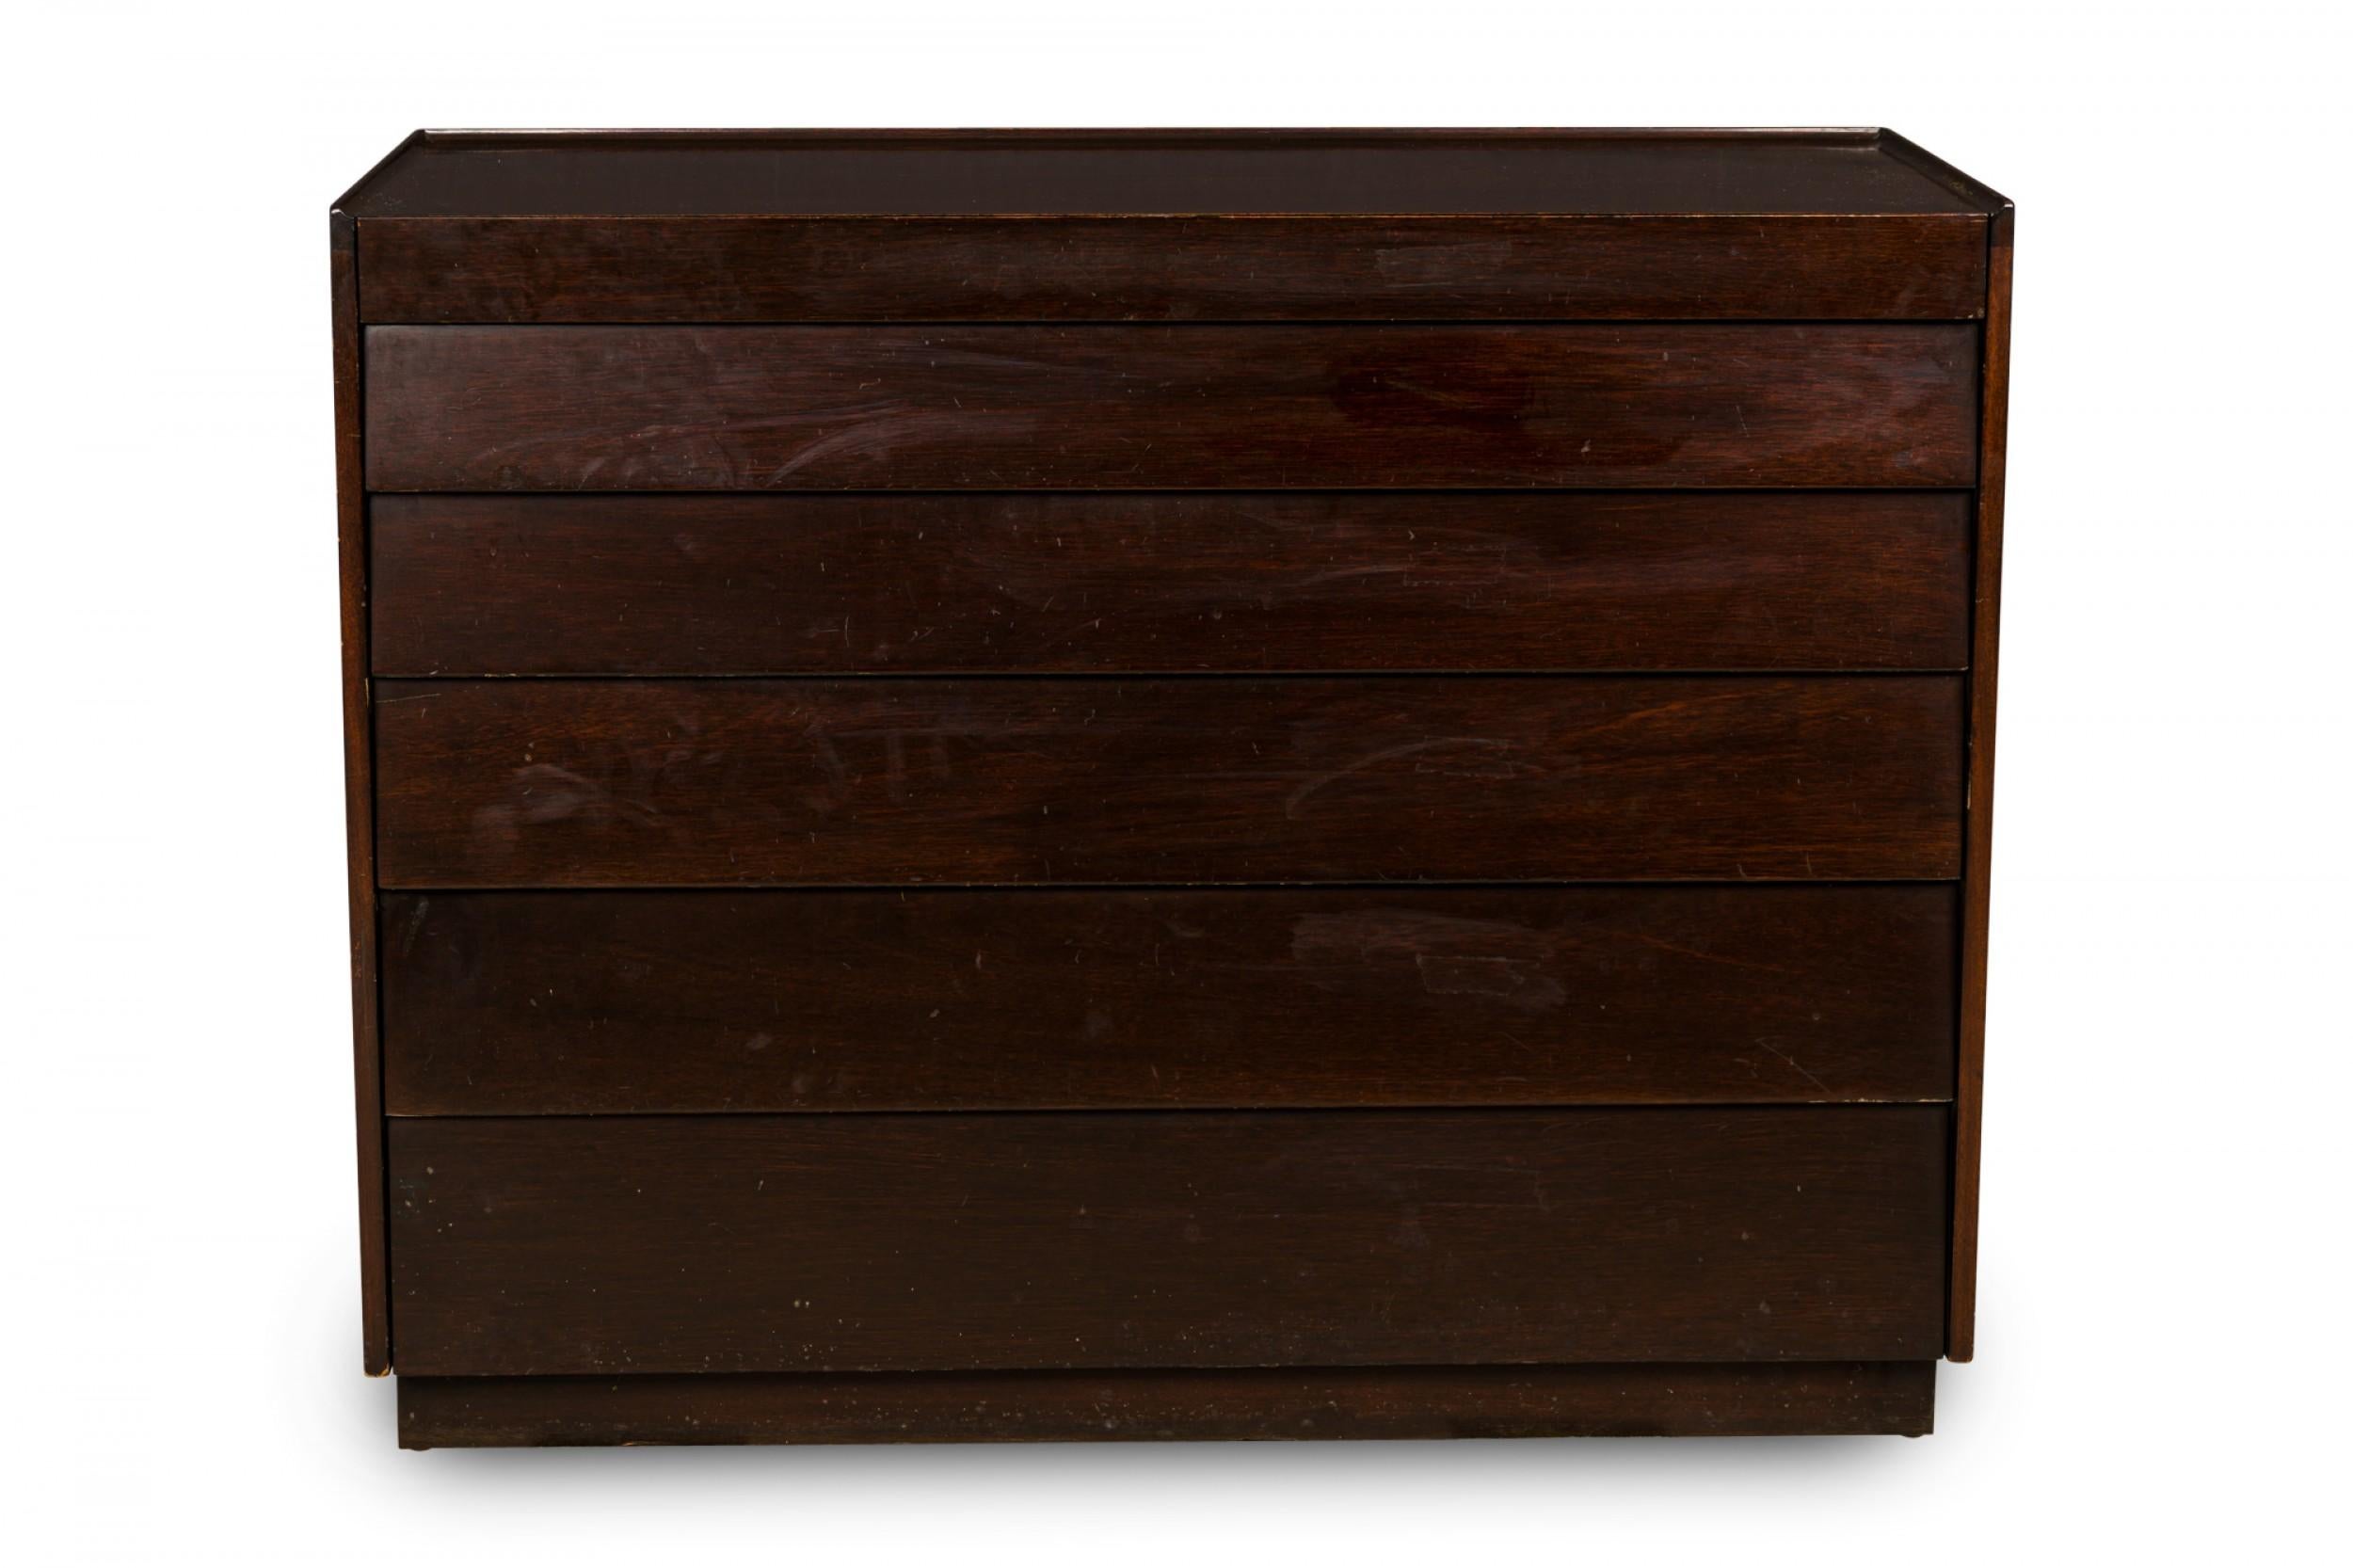 Pair of American mid-century dark lacquered wooden commodes / chests with 6 louver-front drawers in descending height. (EDWARD WORMLEY FOR DUNBAR FURNITURE COMPANY)(PRICED AS PAIR)